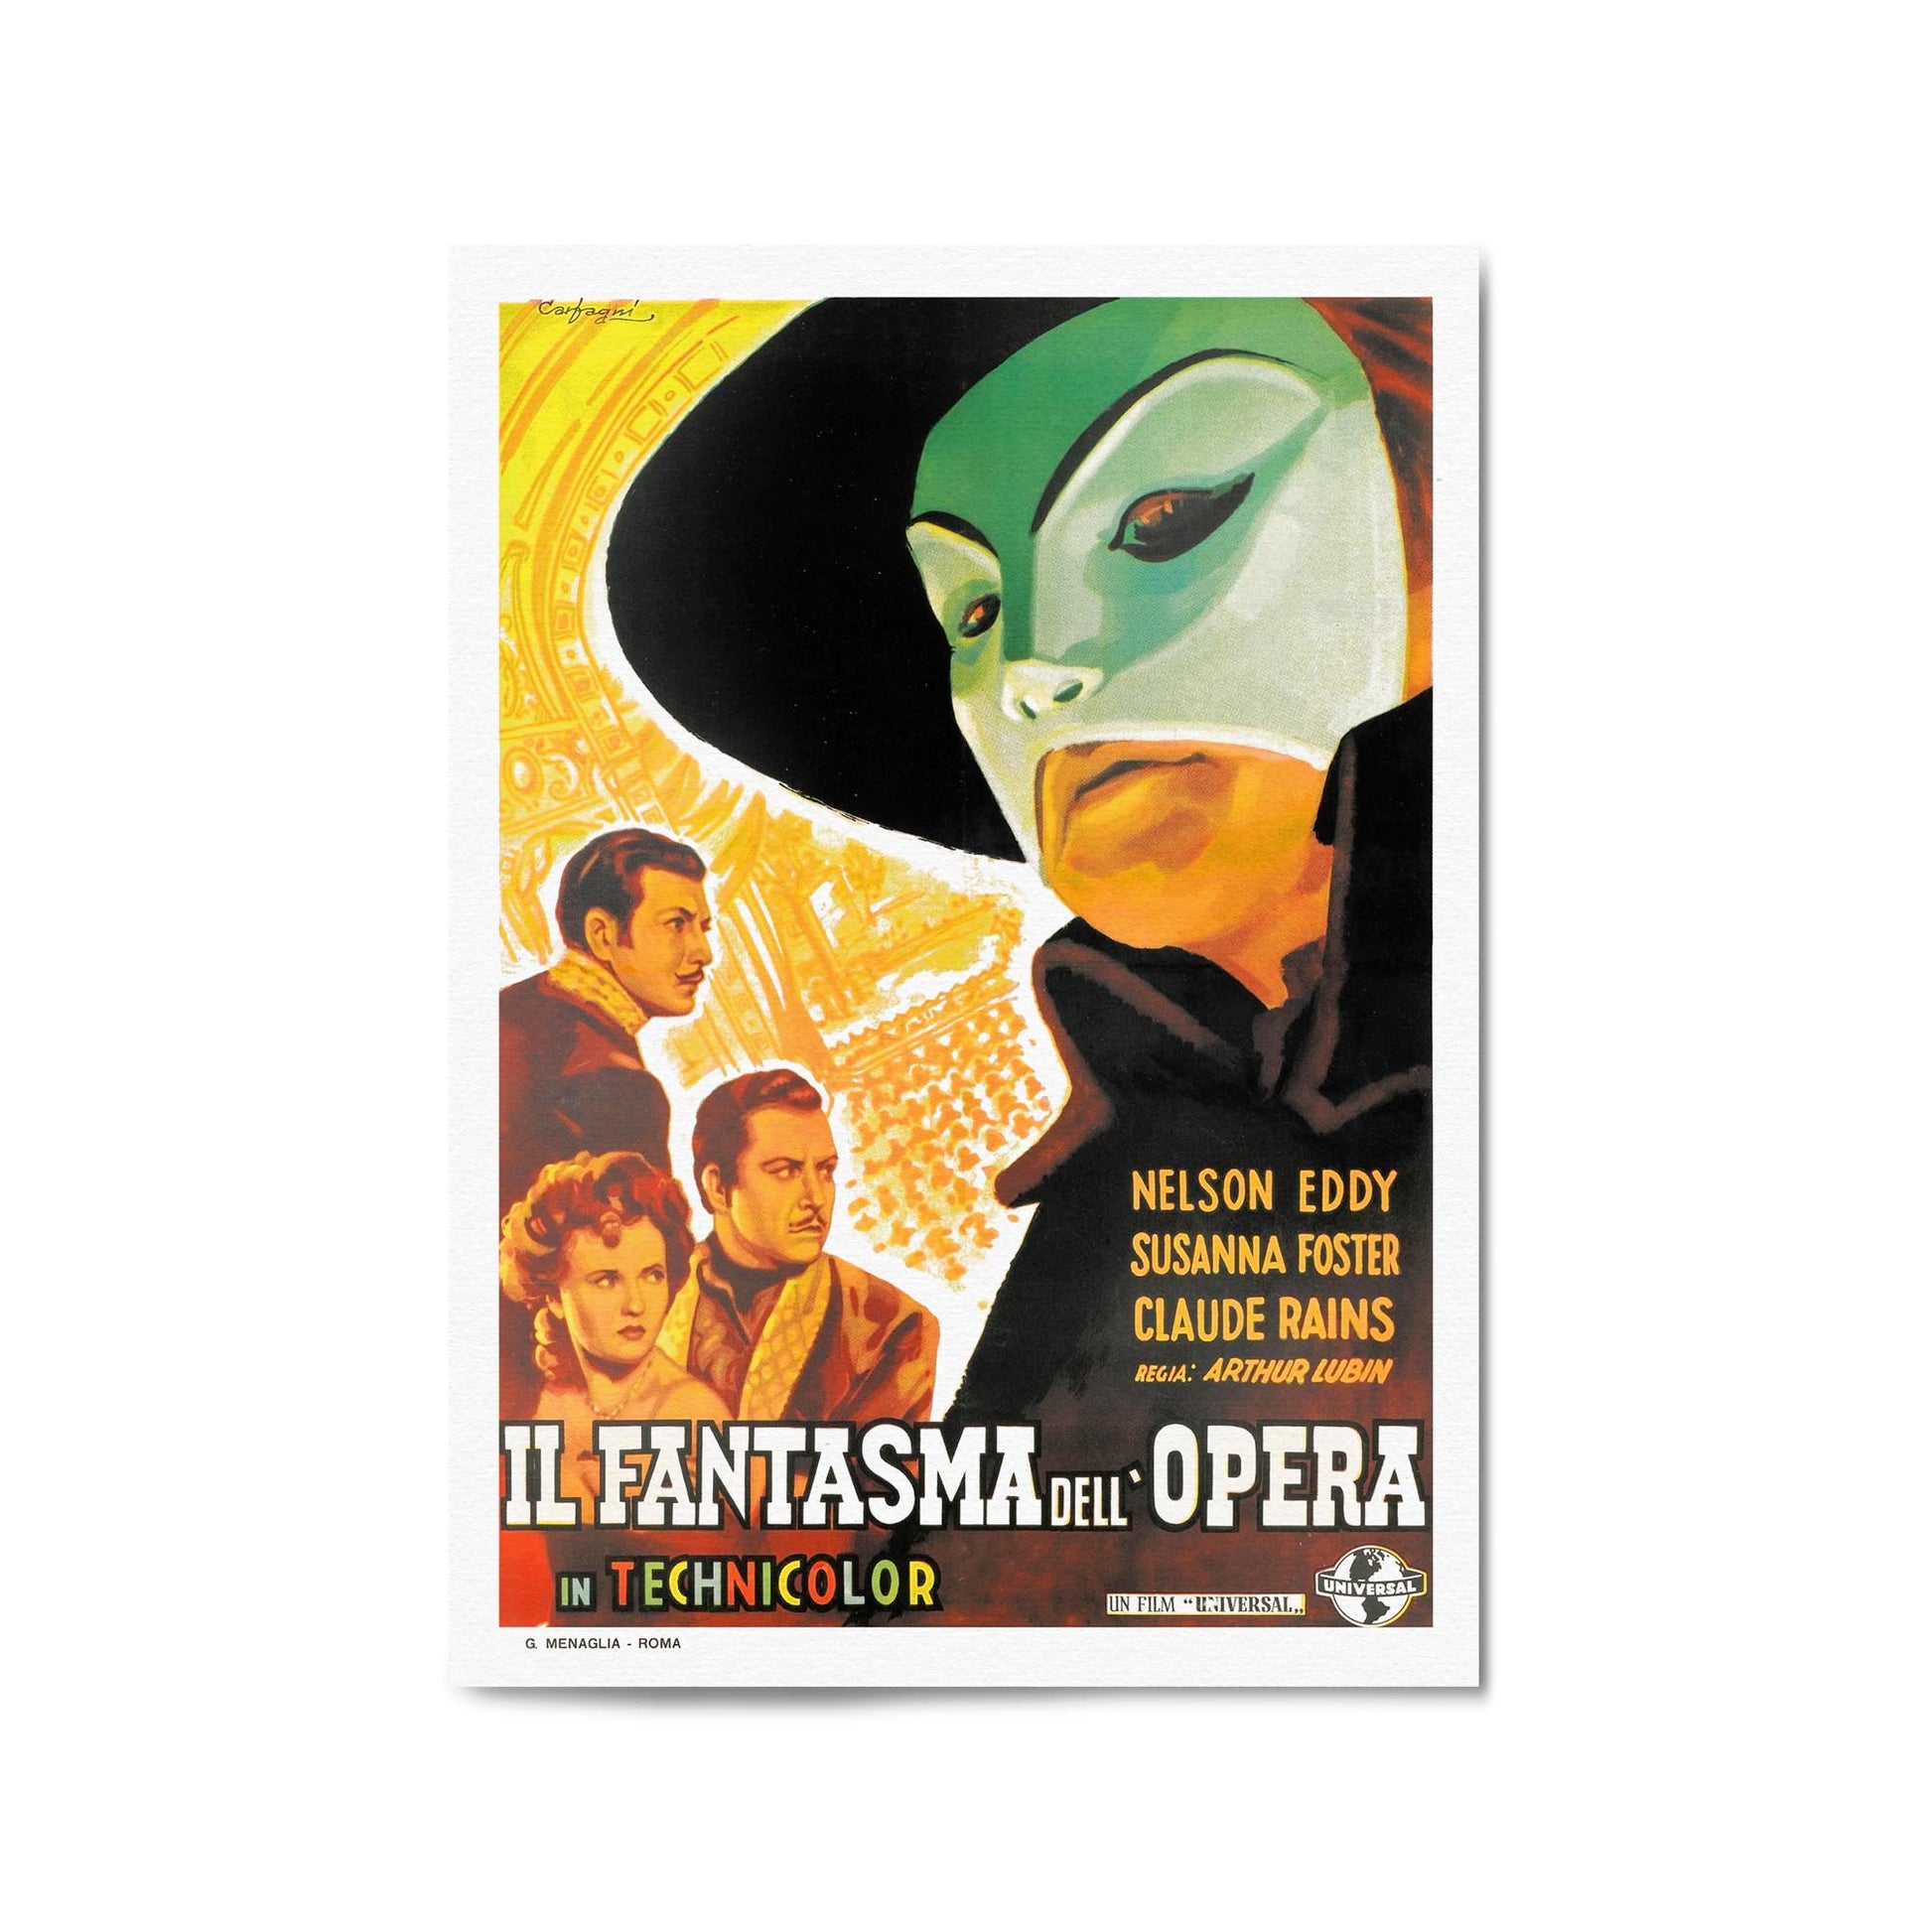 French Phantom of the Opera Vintage Advert Art - The Affordable Art Company